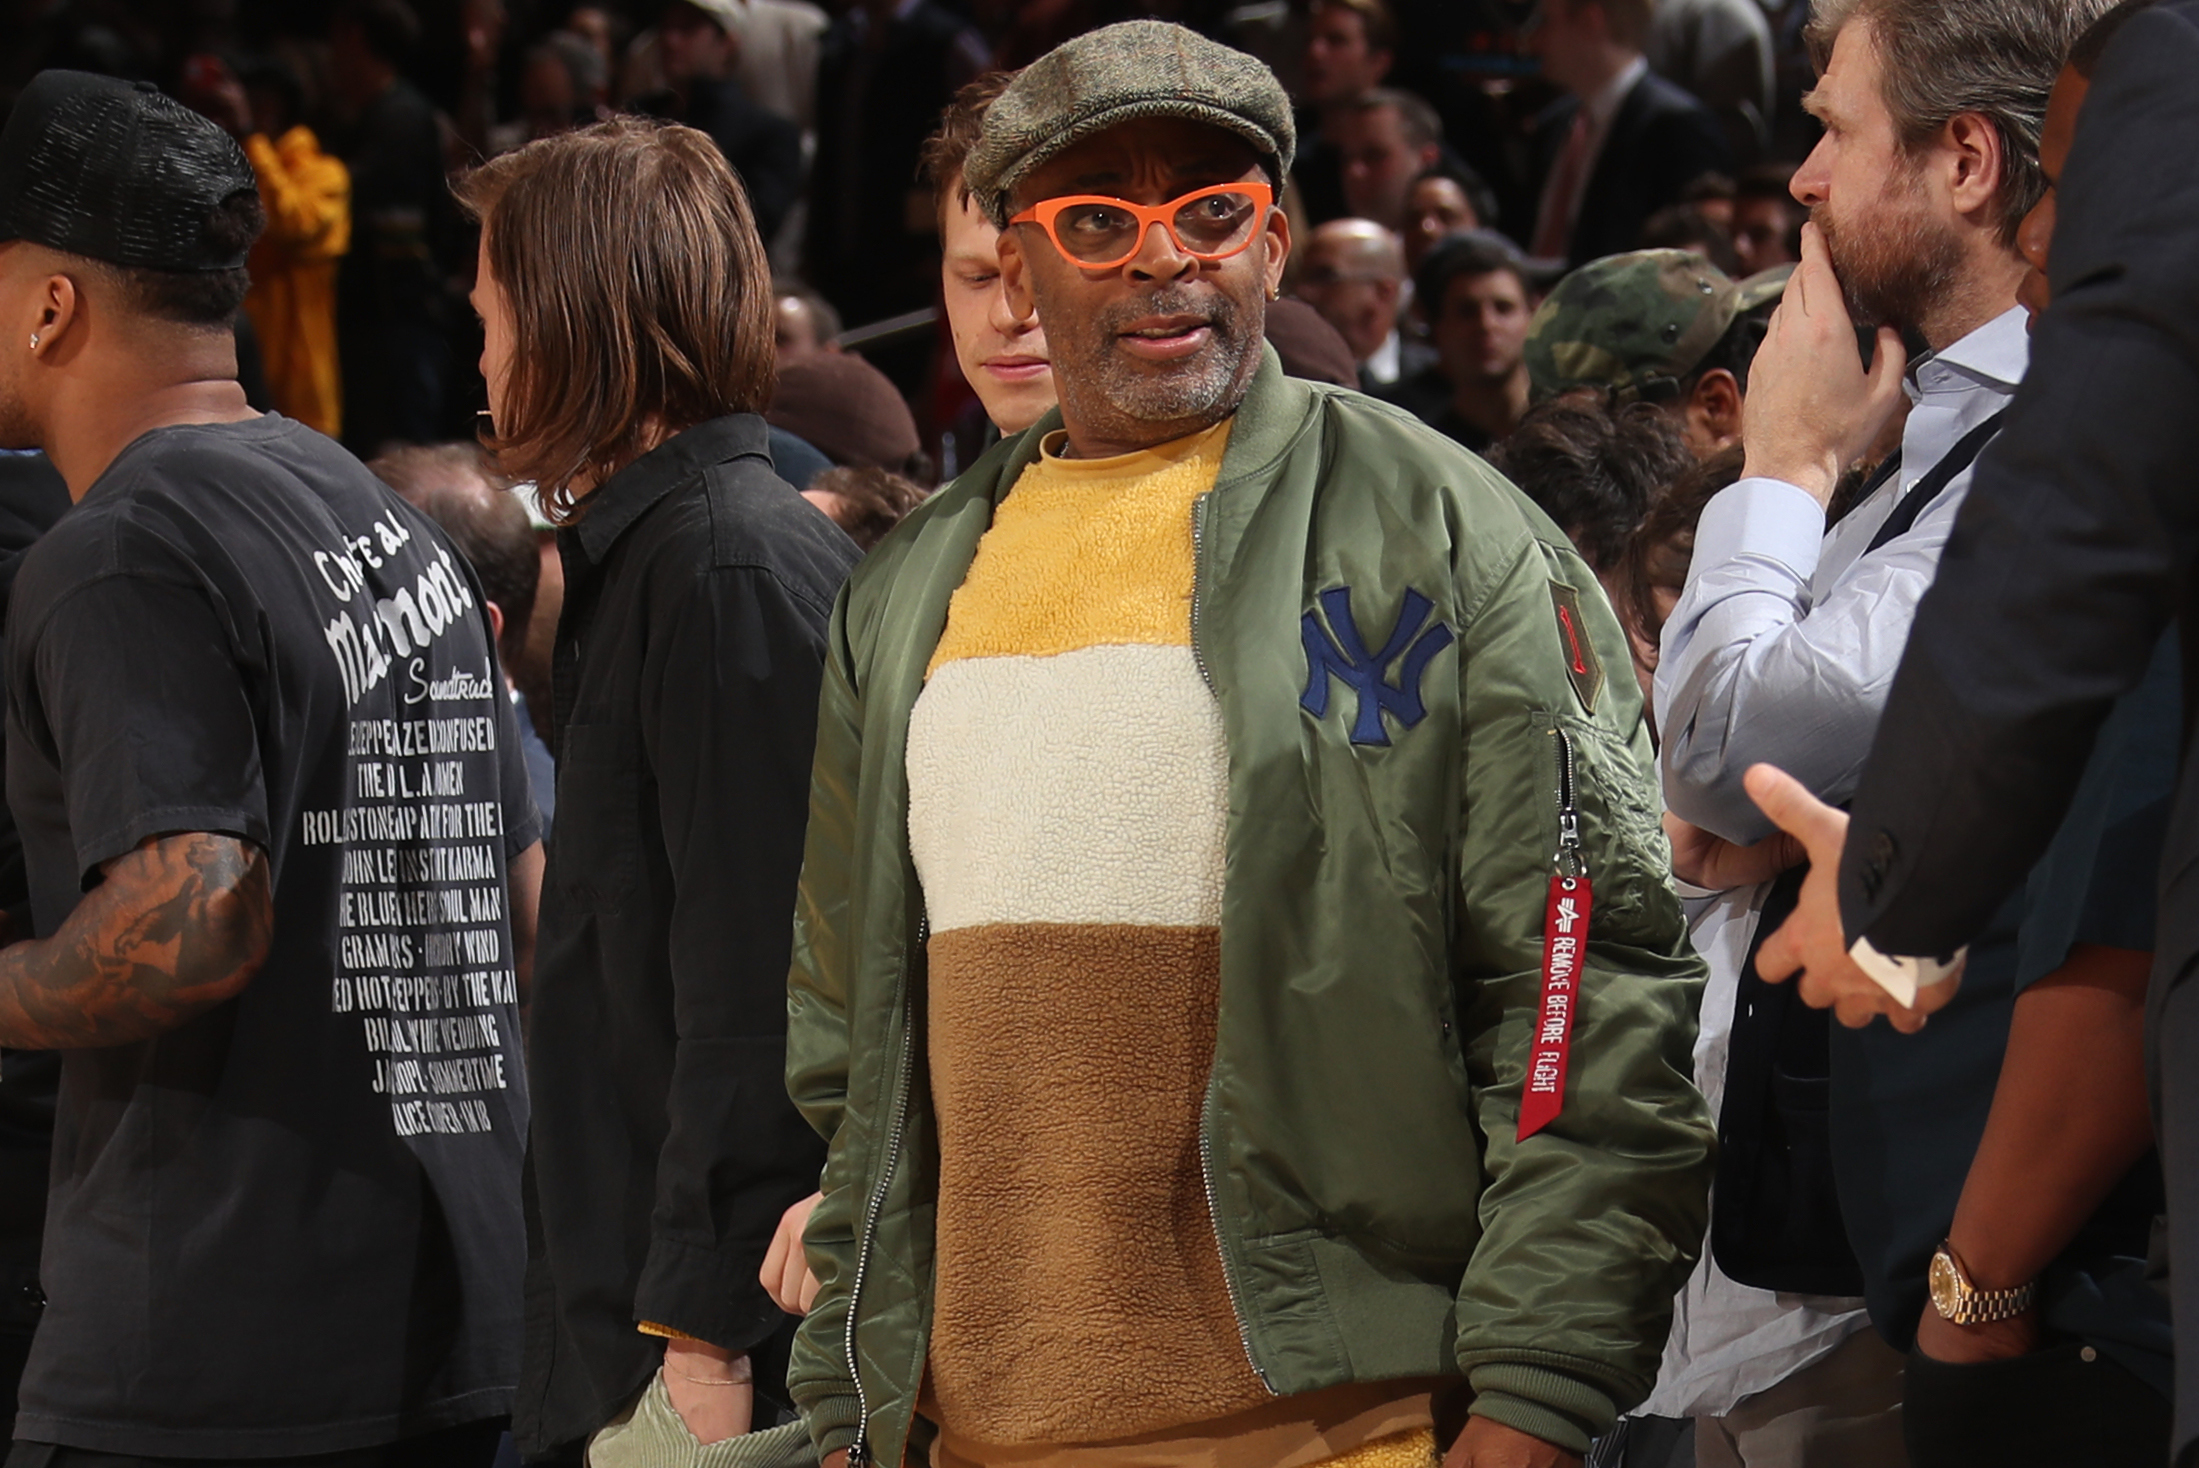 Spike Lee done attending Knicks games this season after 'being